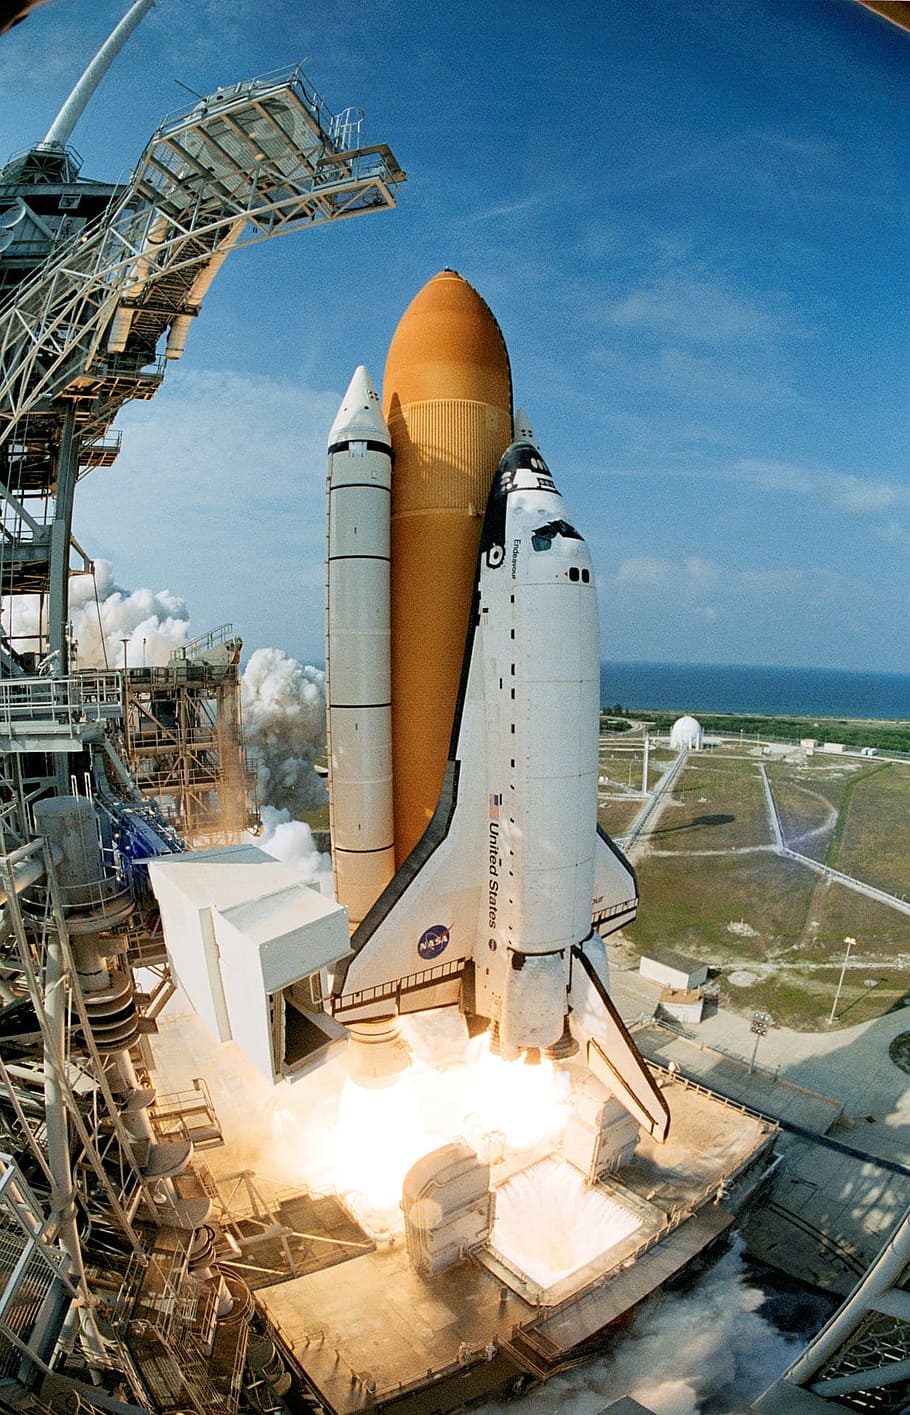 launch, space, shuttle, transport, mission, nasa, sky, nature, day, transportation